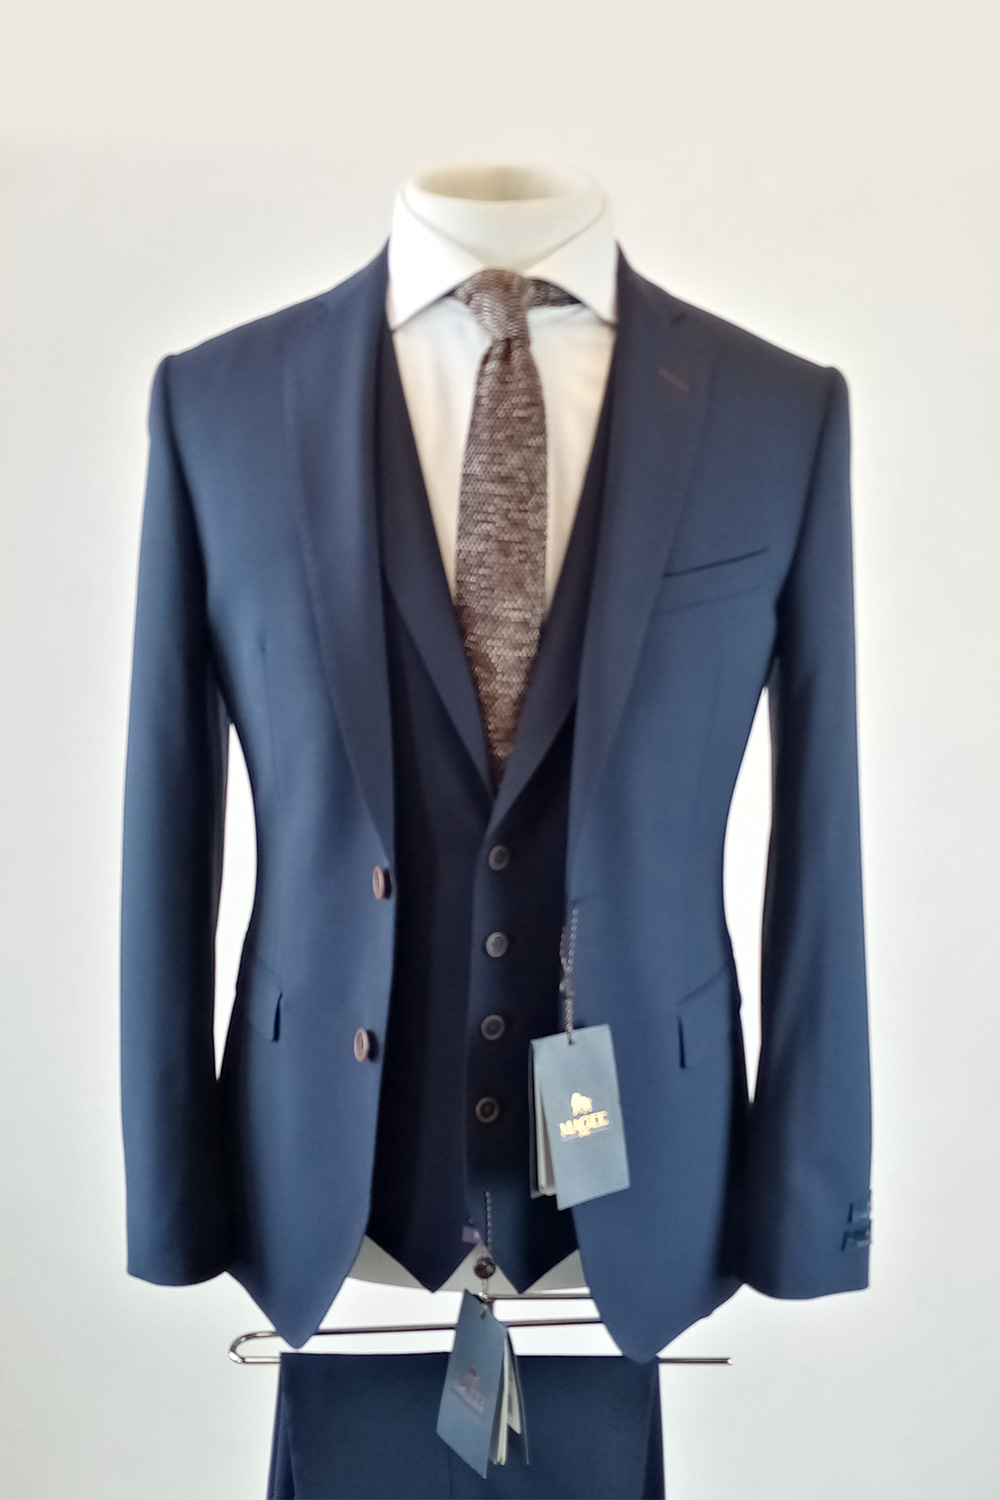 Wilson Dice Check 3 Piece Suit - Tom Murphy's Formal and Menswear